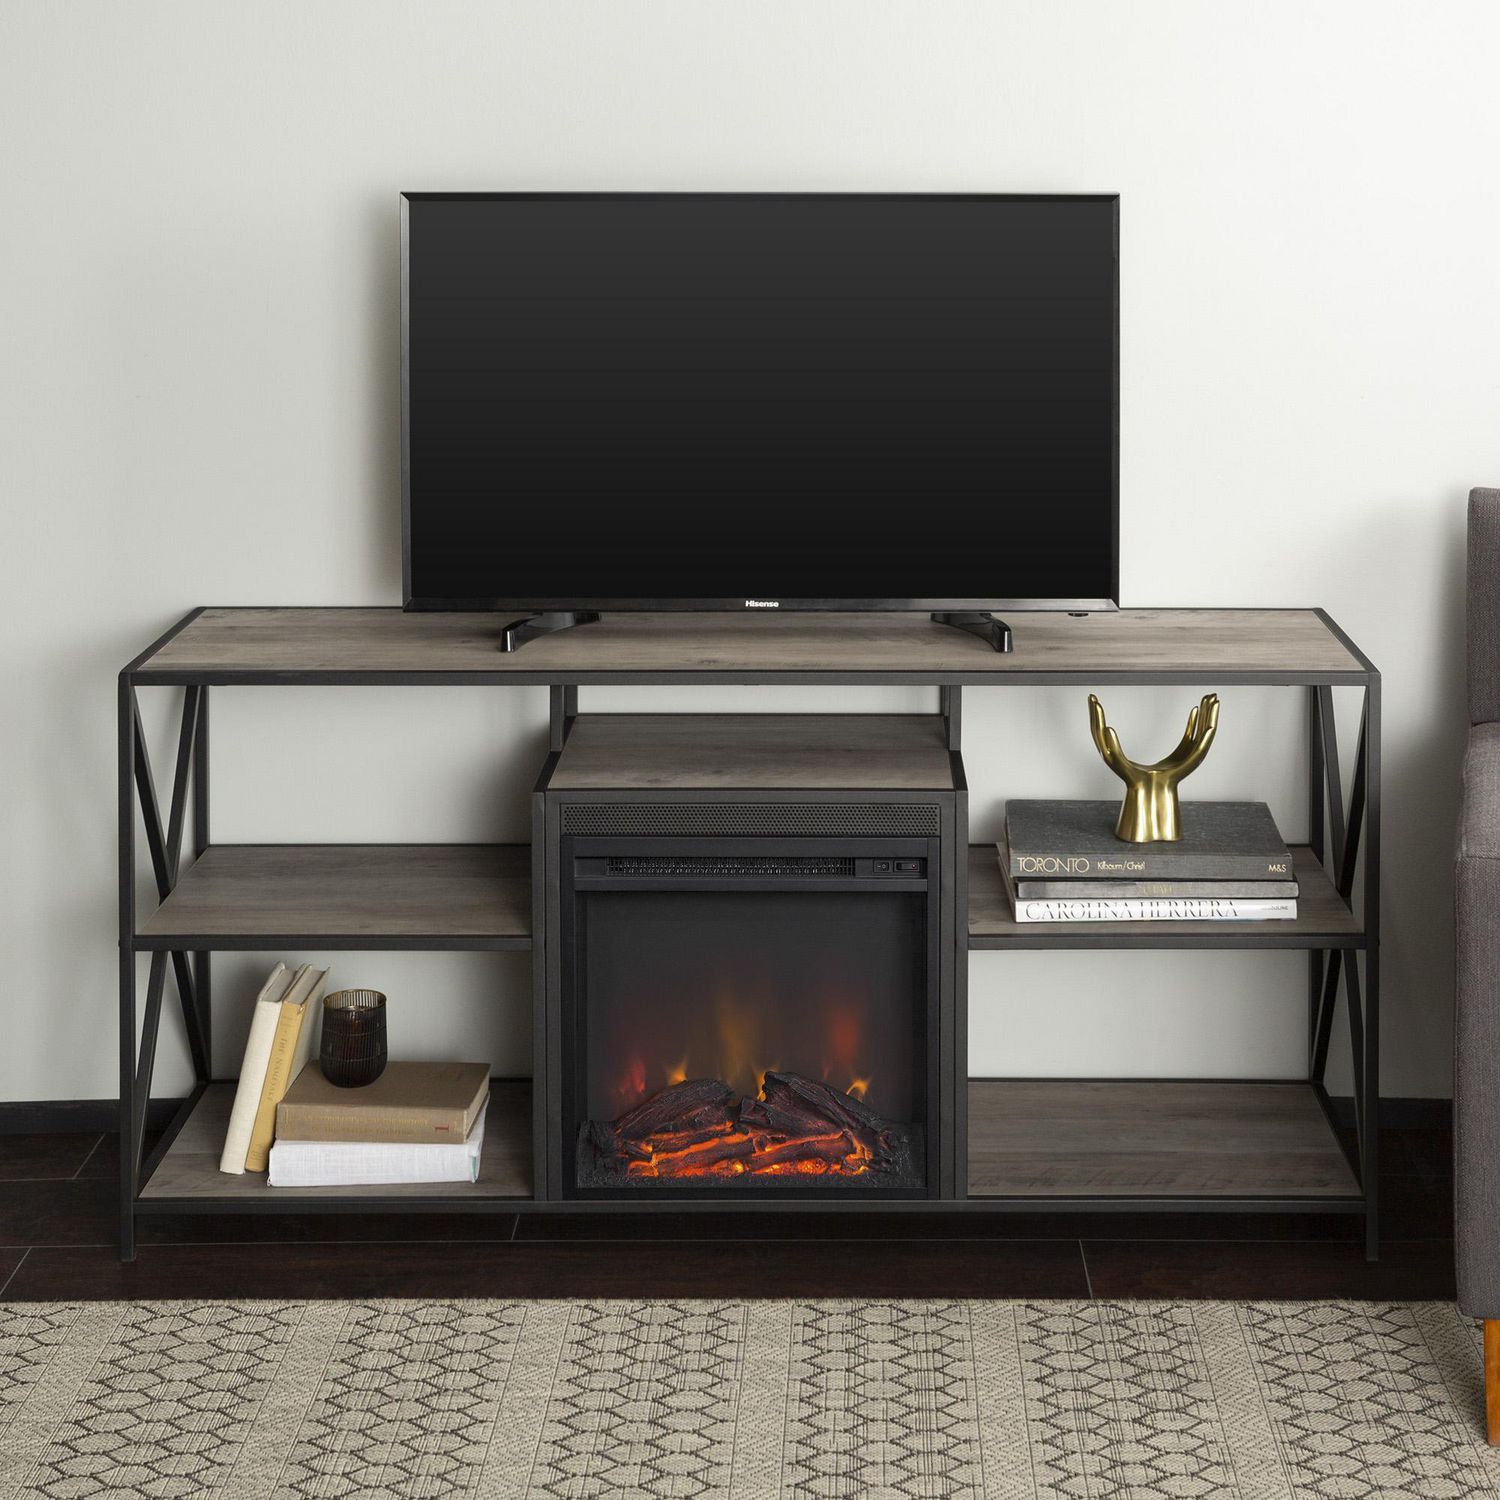 Manor Park Modern Industrial Fireplace Tv Stand For Tv's In Tv Stands With Led Lights In Multiple Finishes (View 3 of 15)